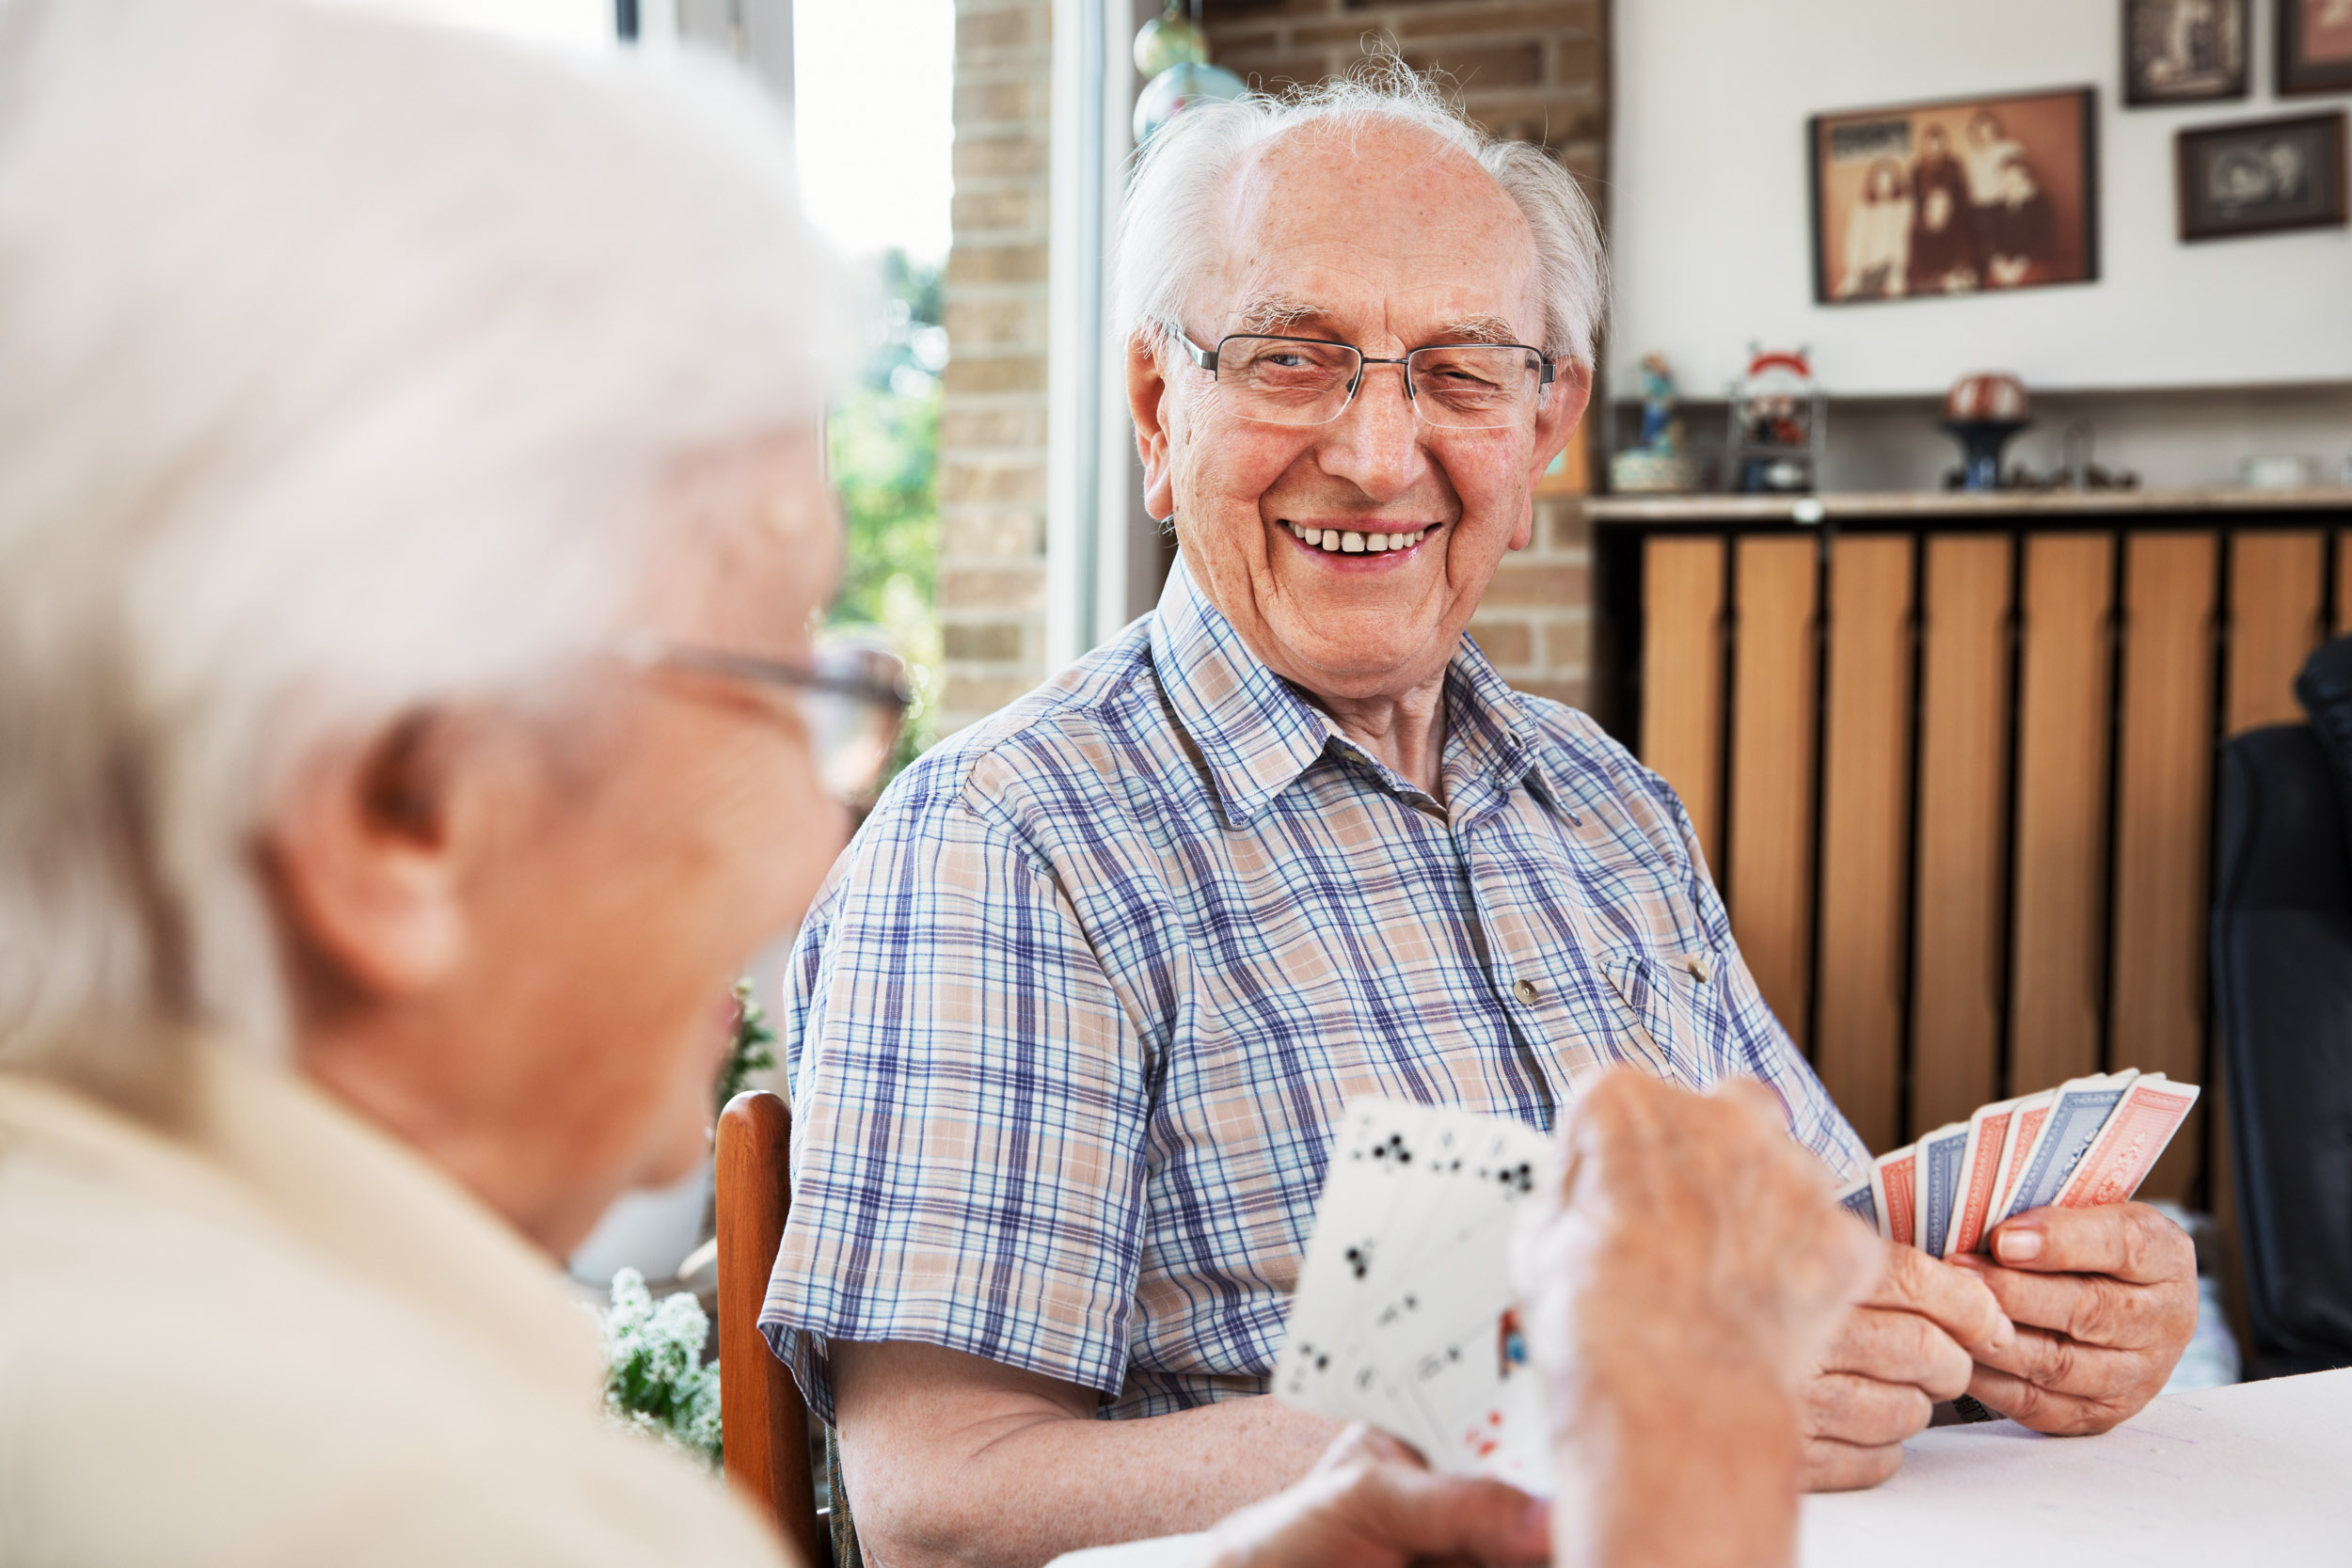 Elderly couple playing cards